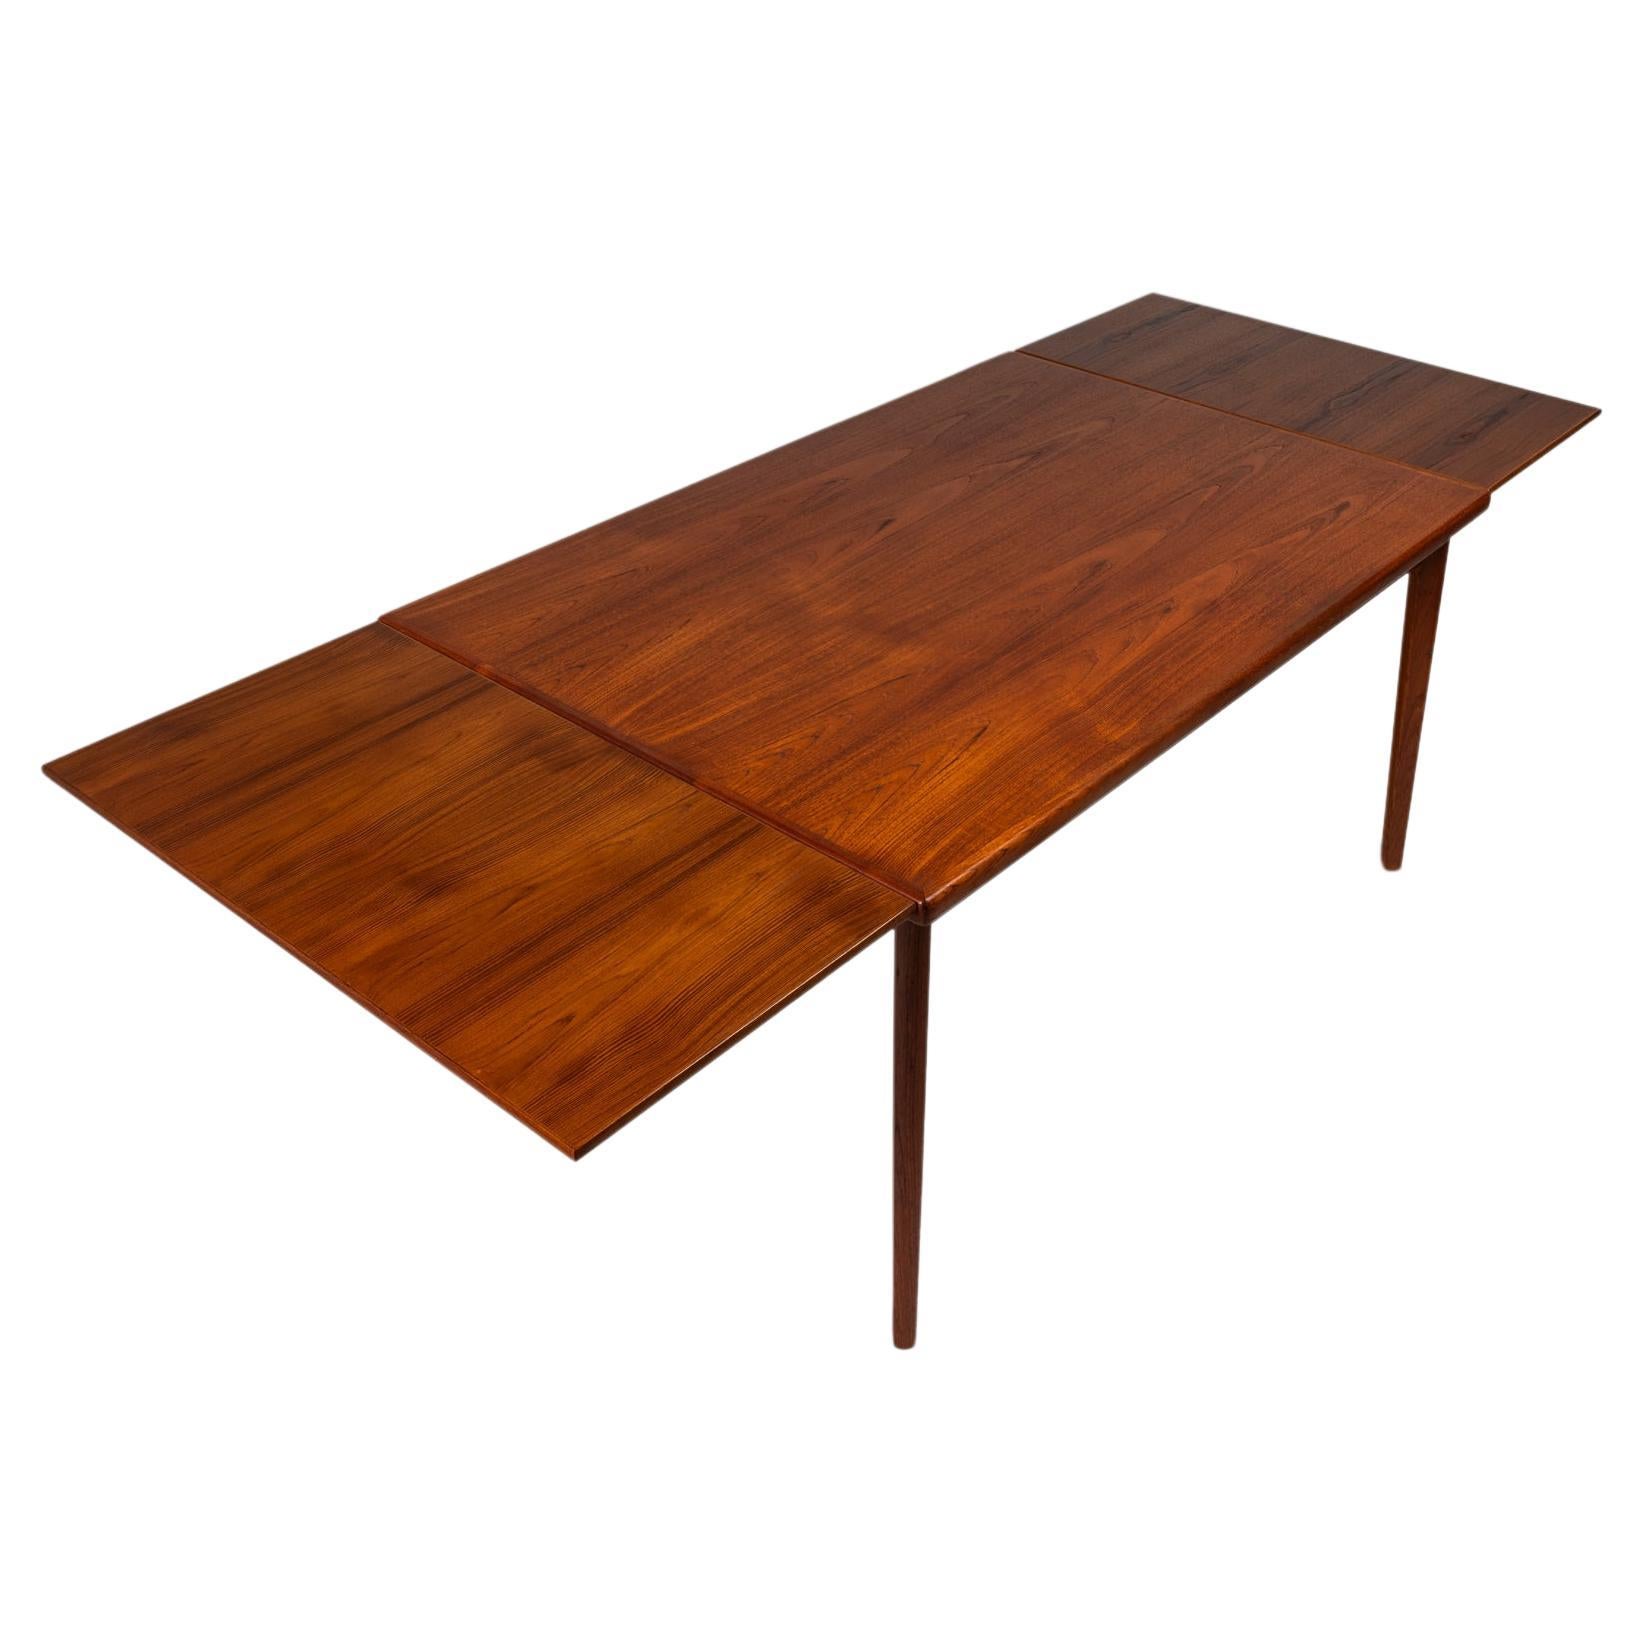 Teak Expansion Dining Table w/ Stow-in Leaves by BRDR Furbo, Denmark, c. 1960s For Sale